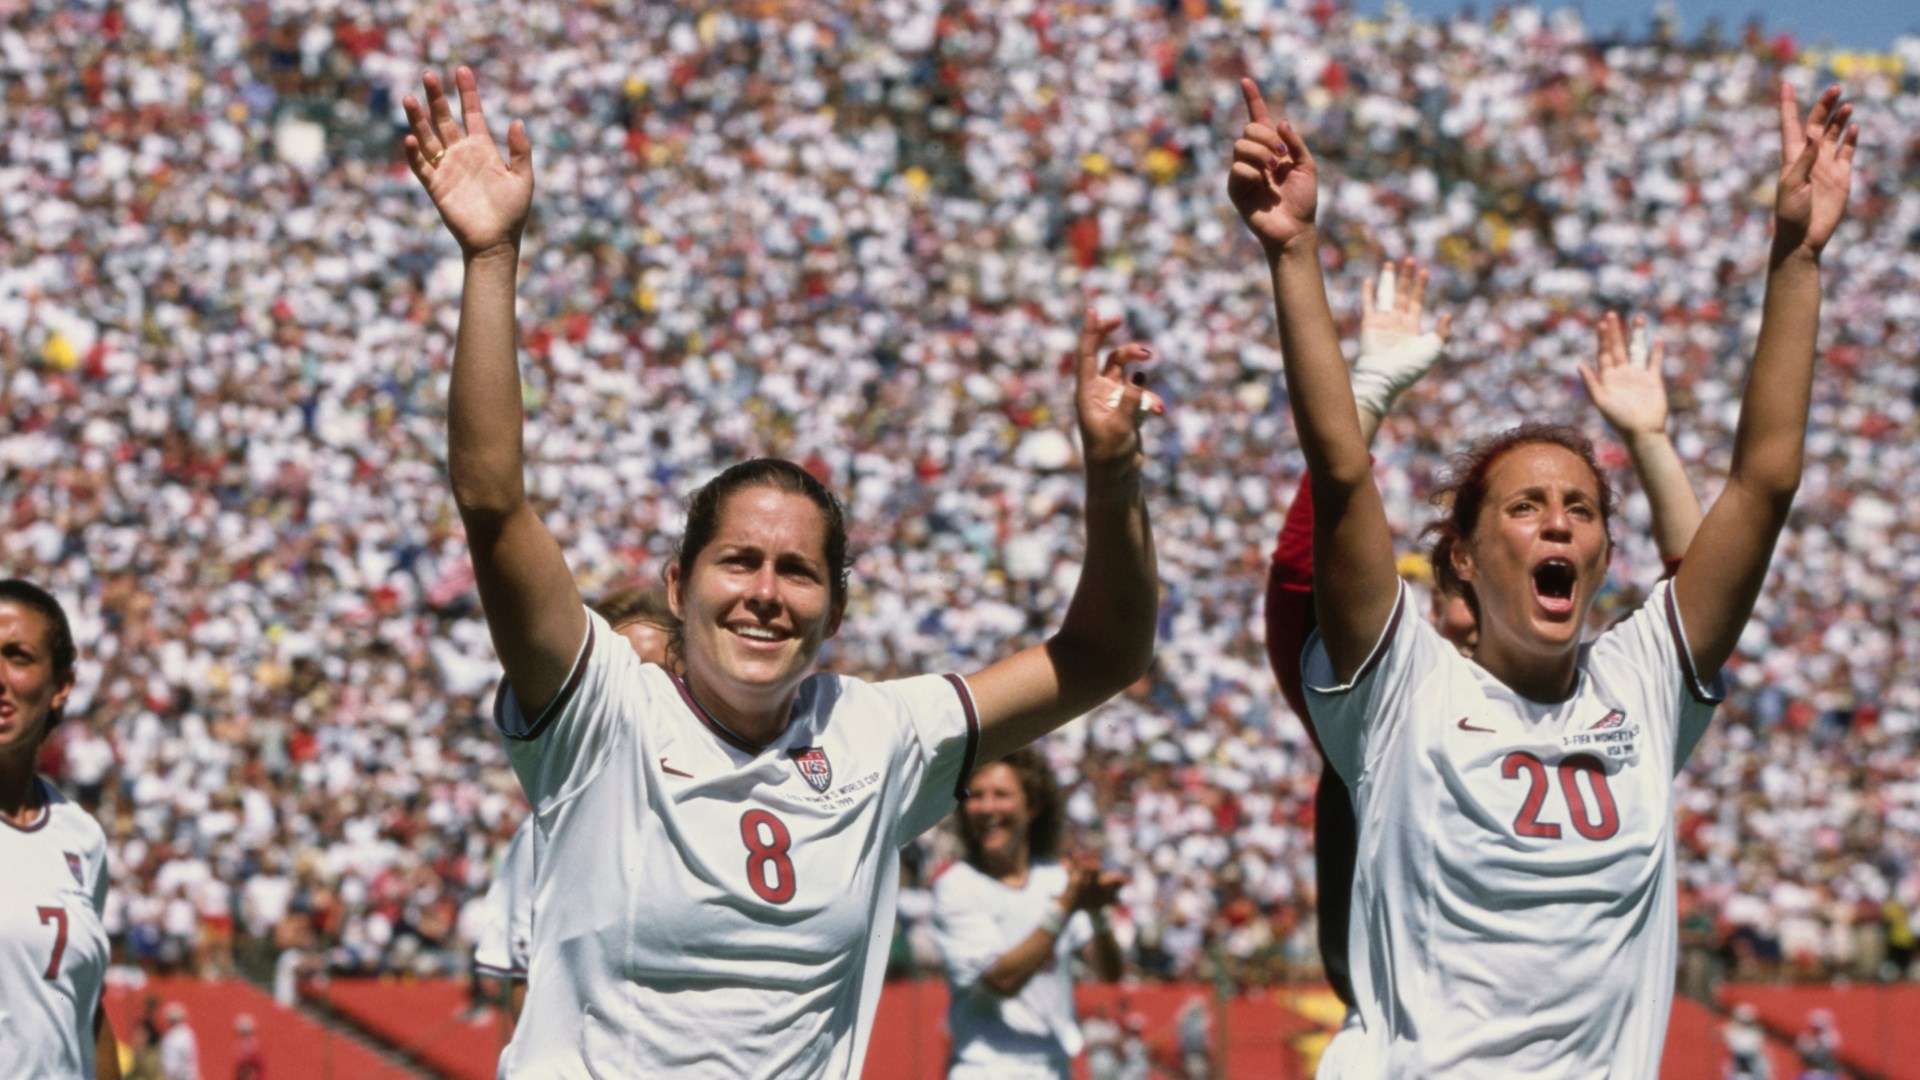 1999 USWNT World Cup final